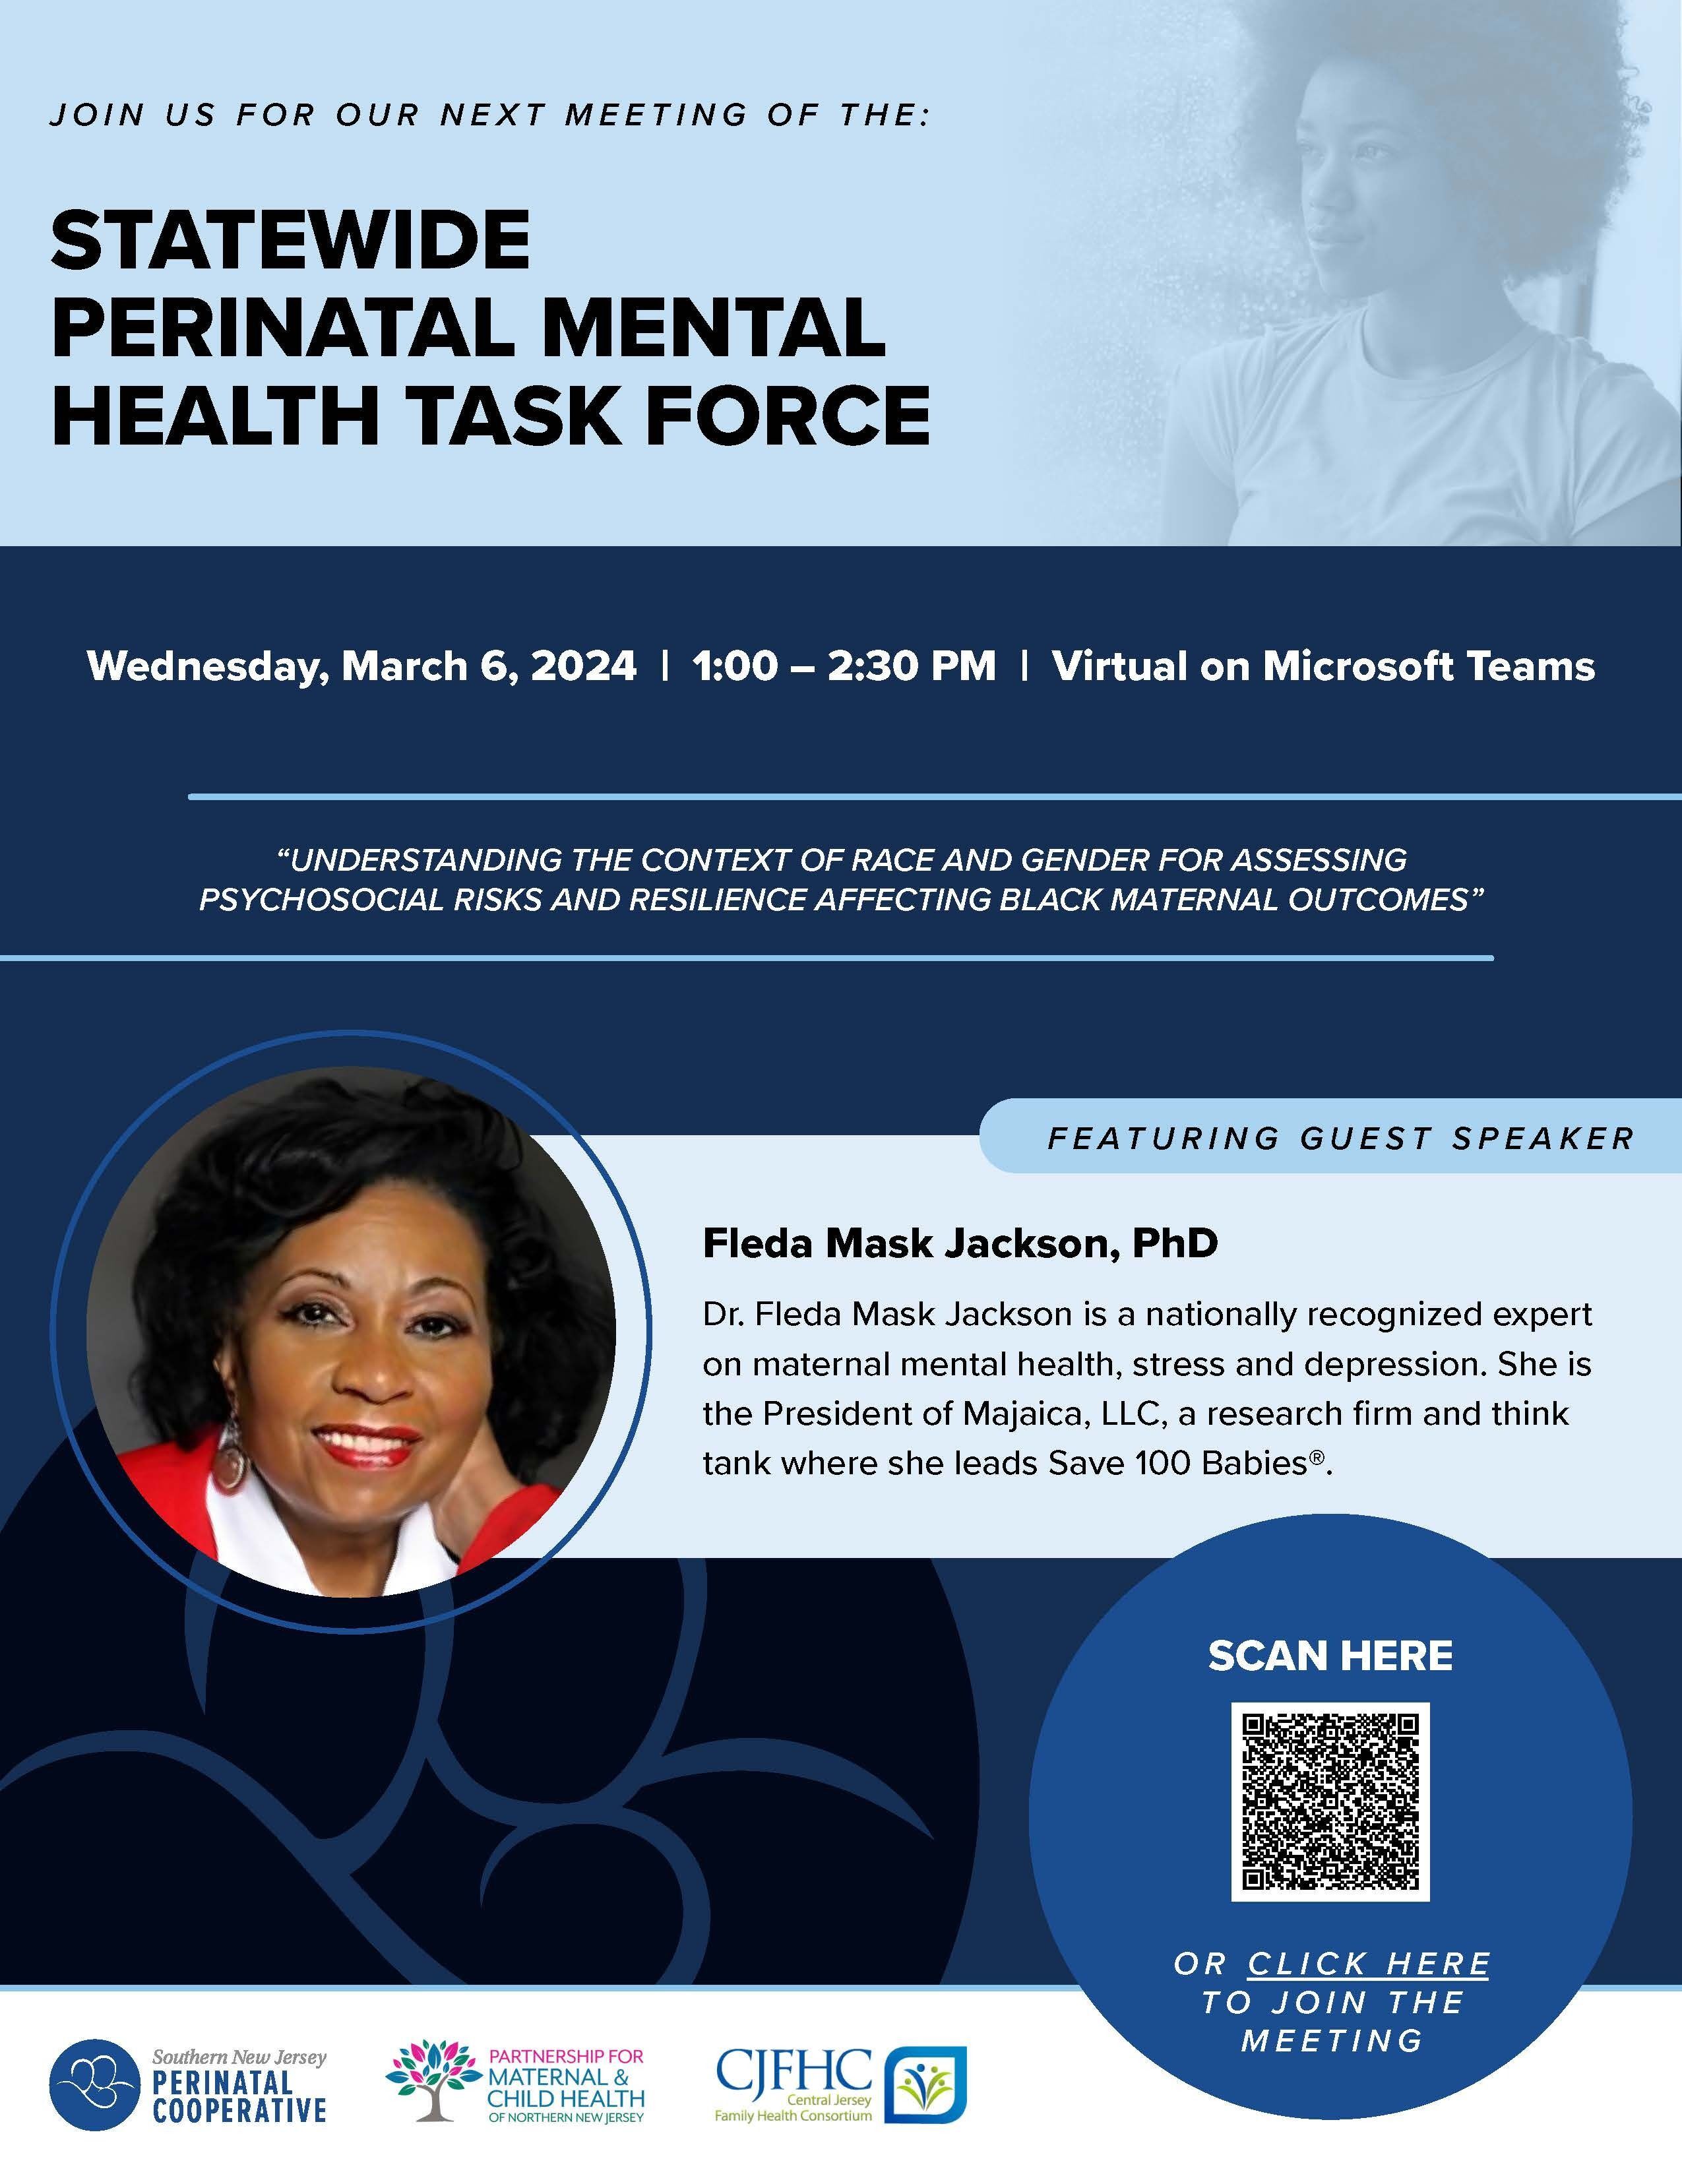 Exploring Race, Gender, and Maternal Mental Health: Join the Statewide Perinatal Mental Health Task Force